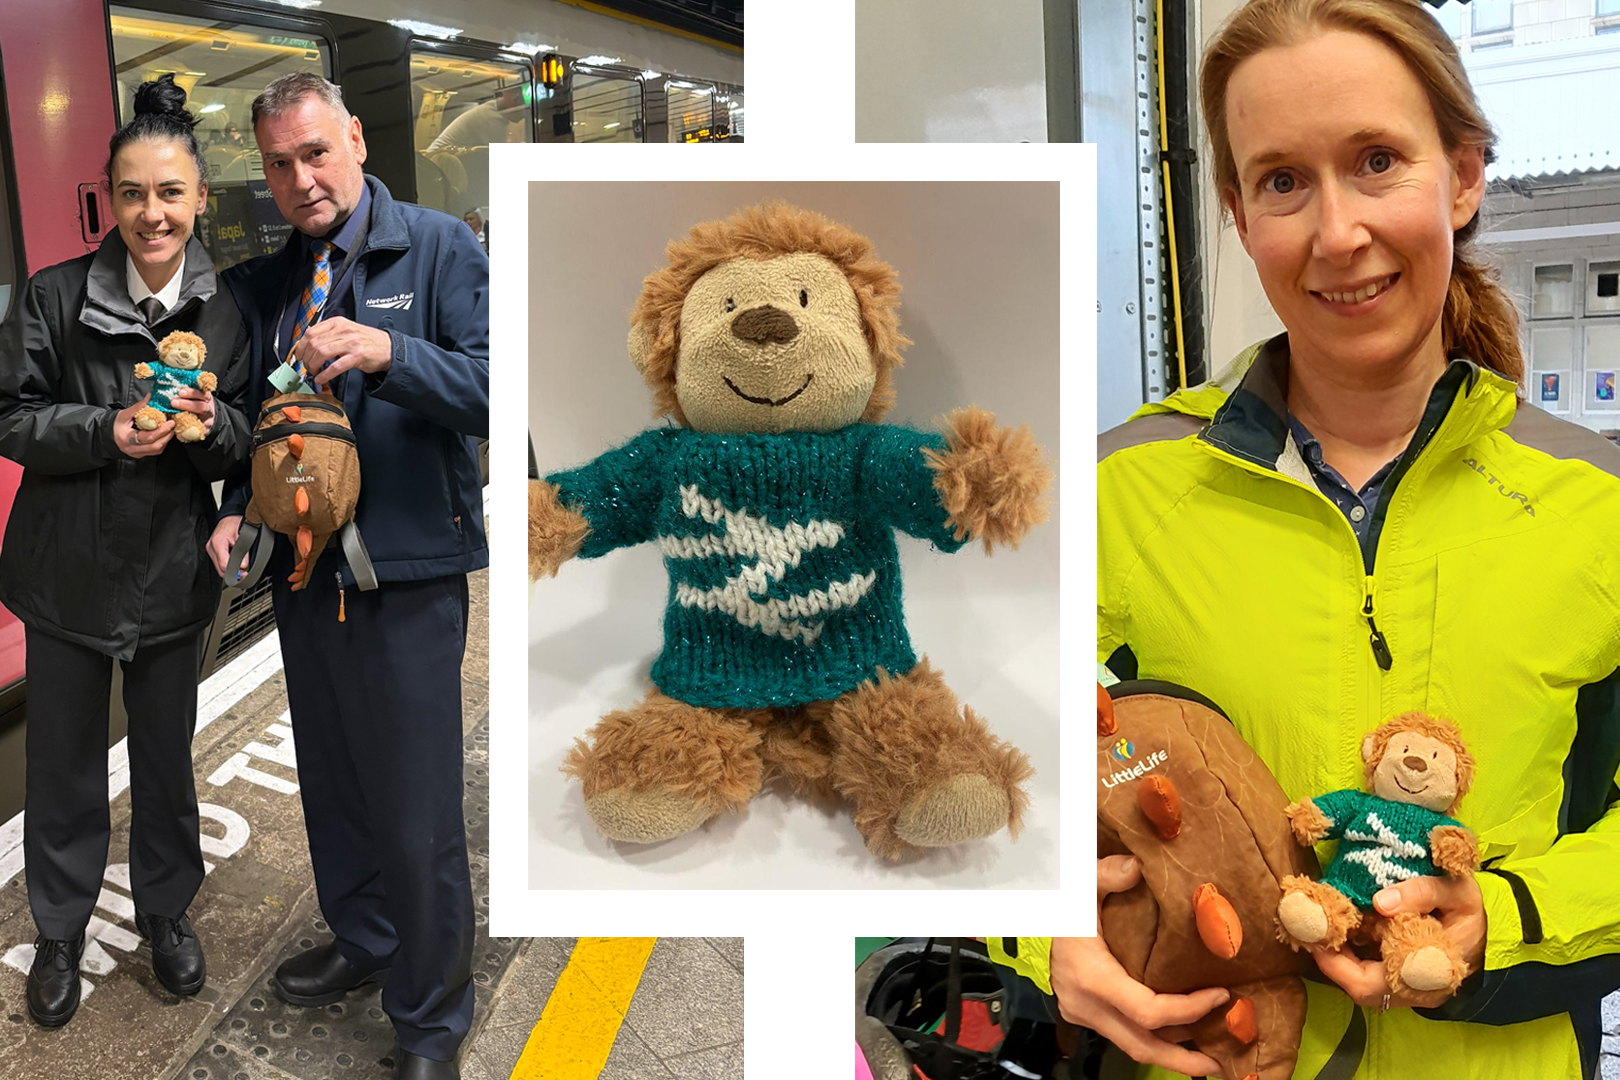 Staff adorned the monkey in a tiny, hand-knitted jumper previously made as a Christmas decoration (Network Rail/PA)